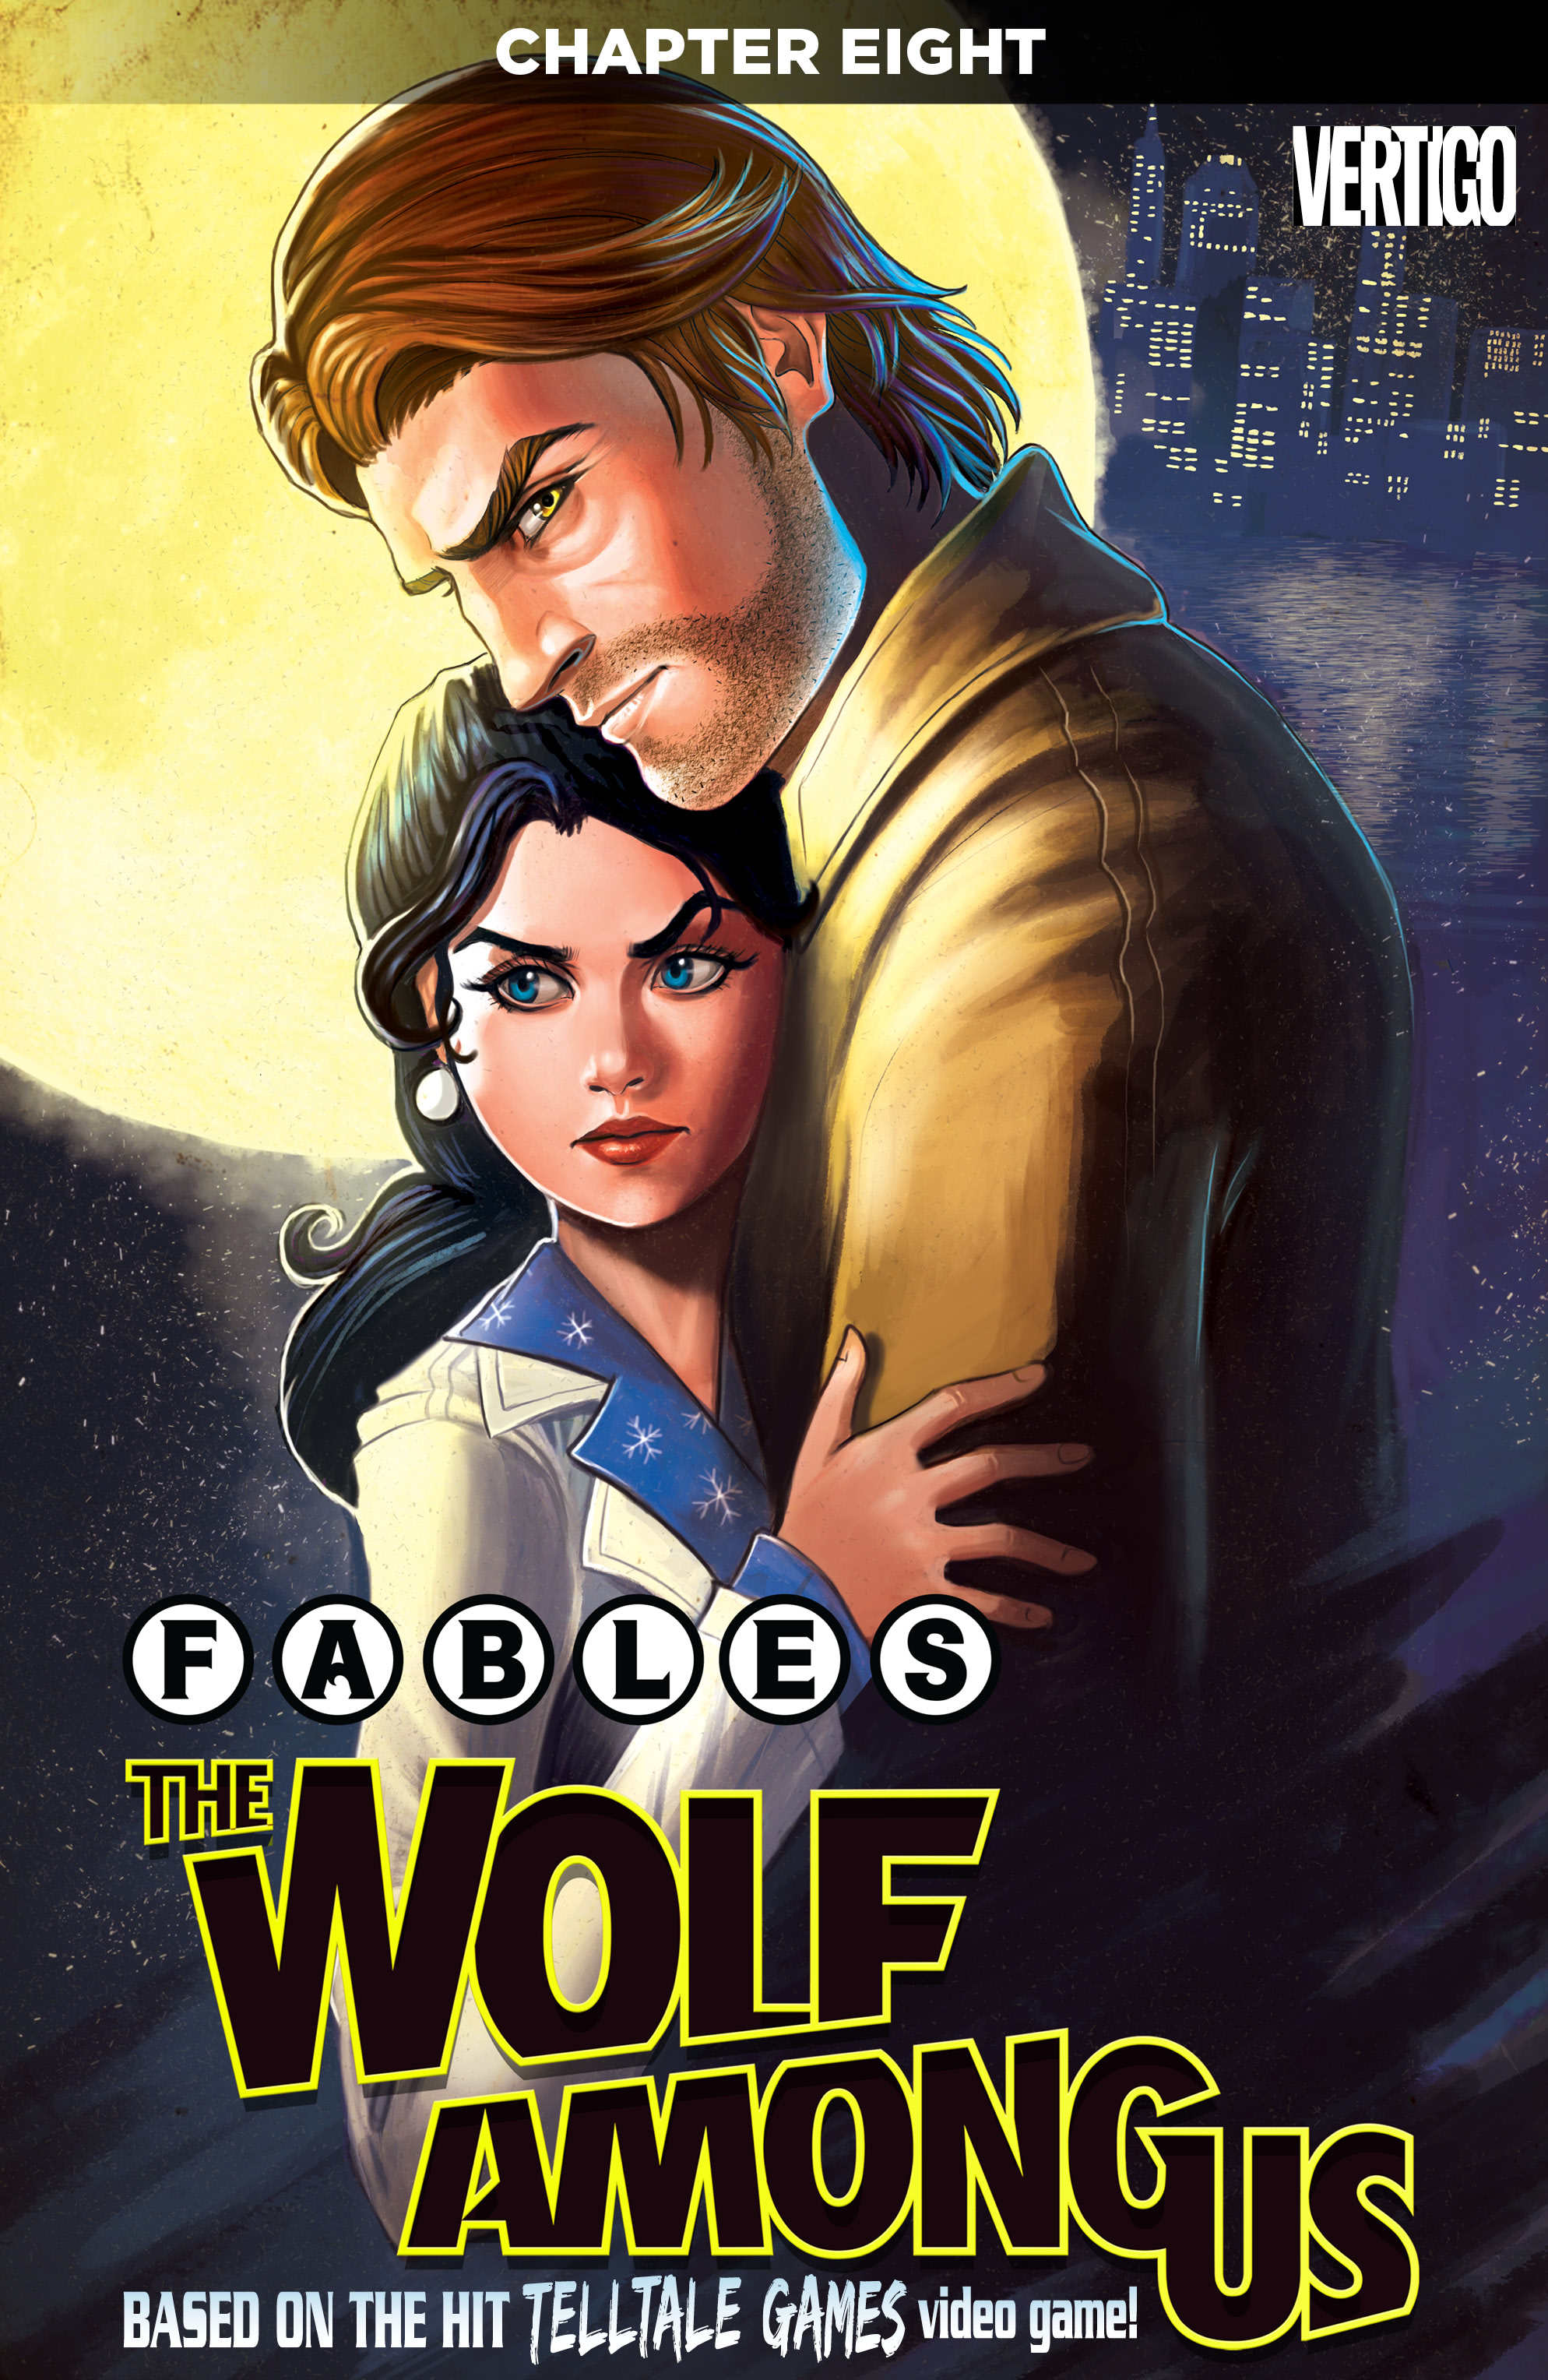 Fables: The Wolf Among Us #8 preview images